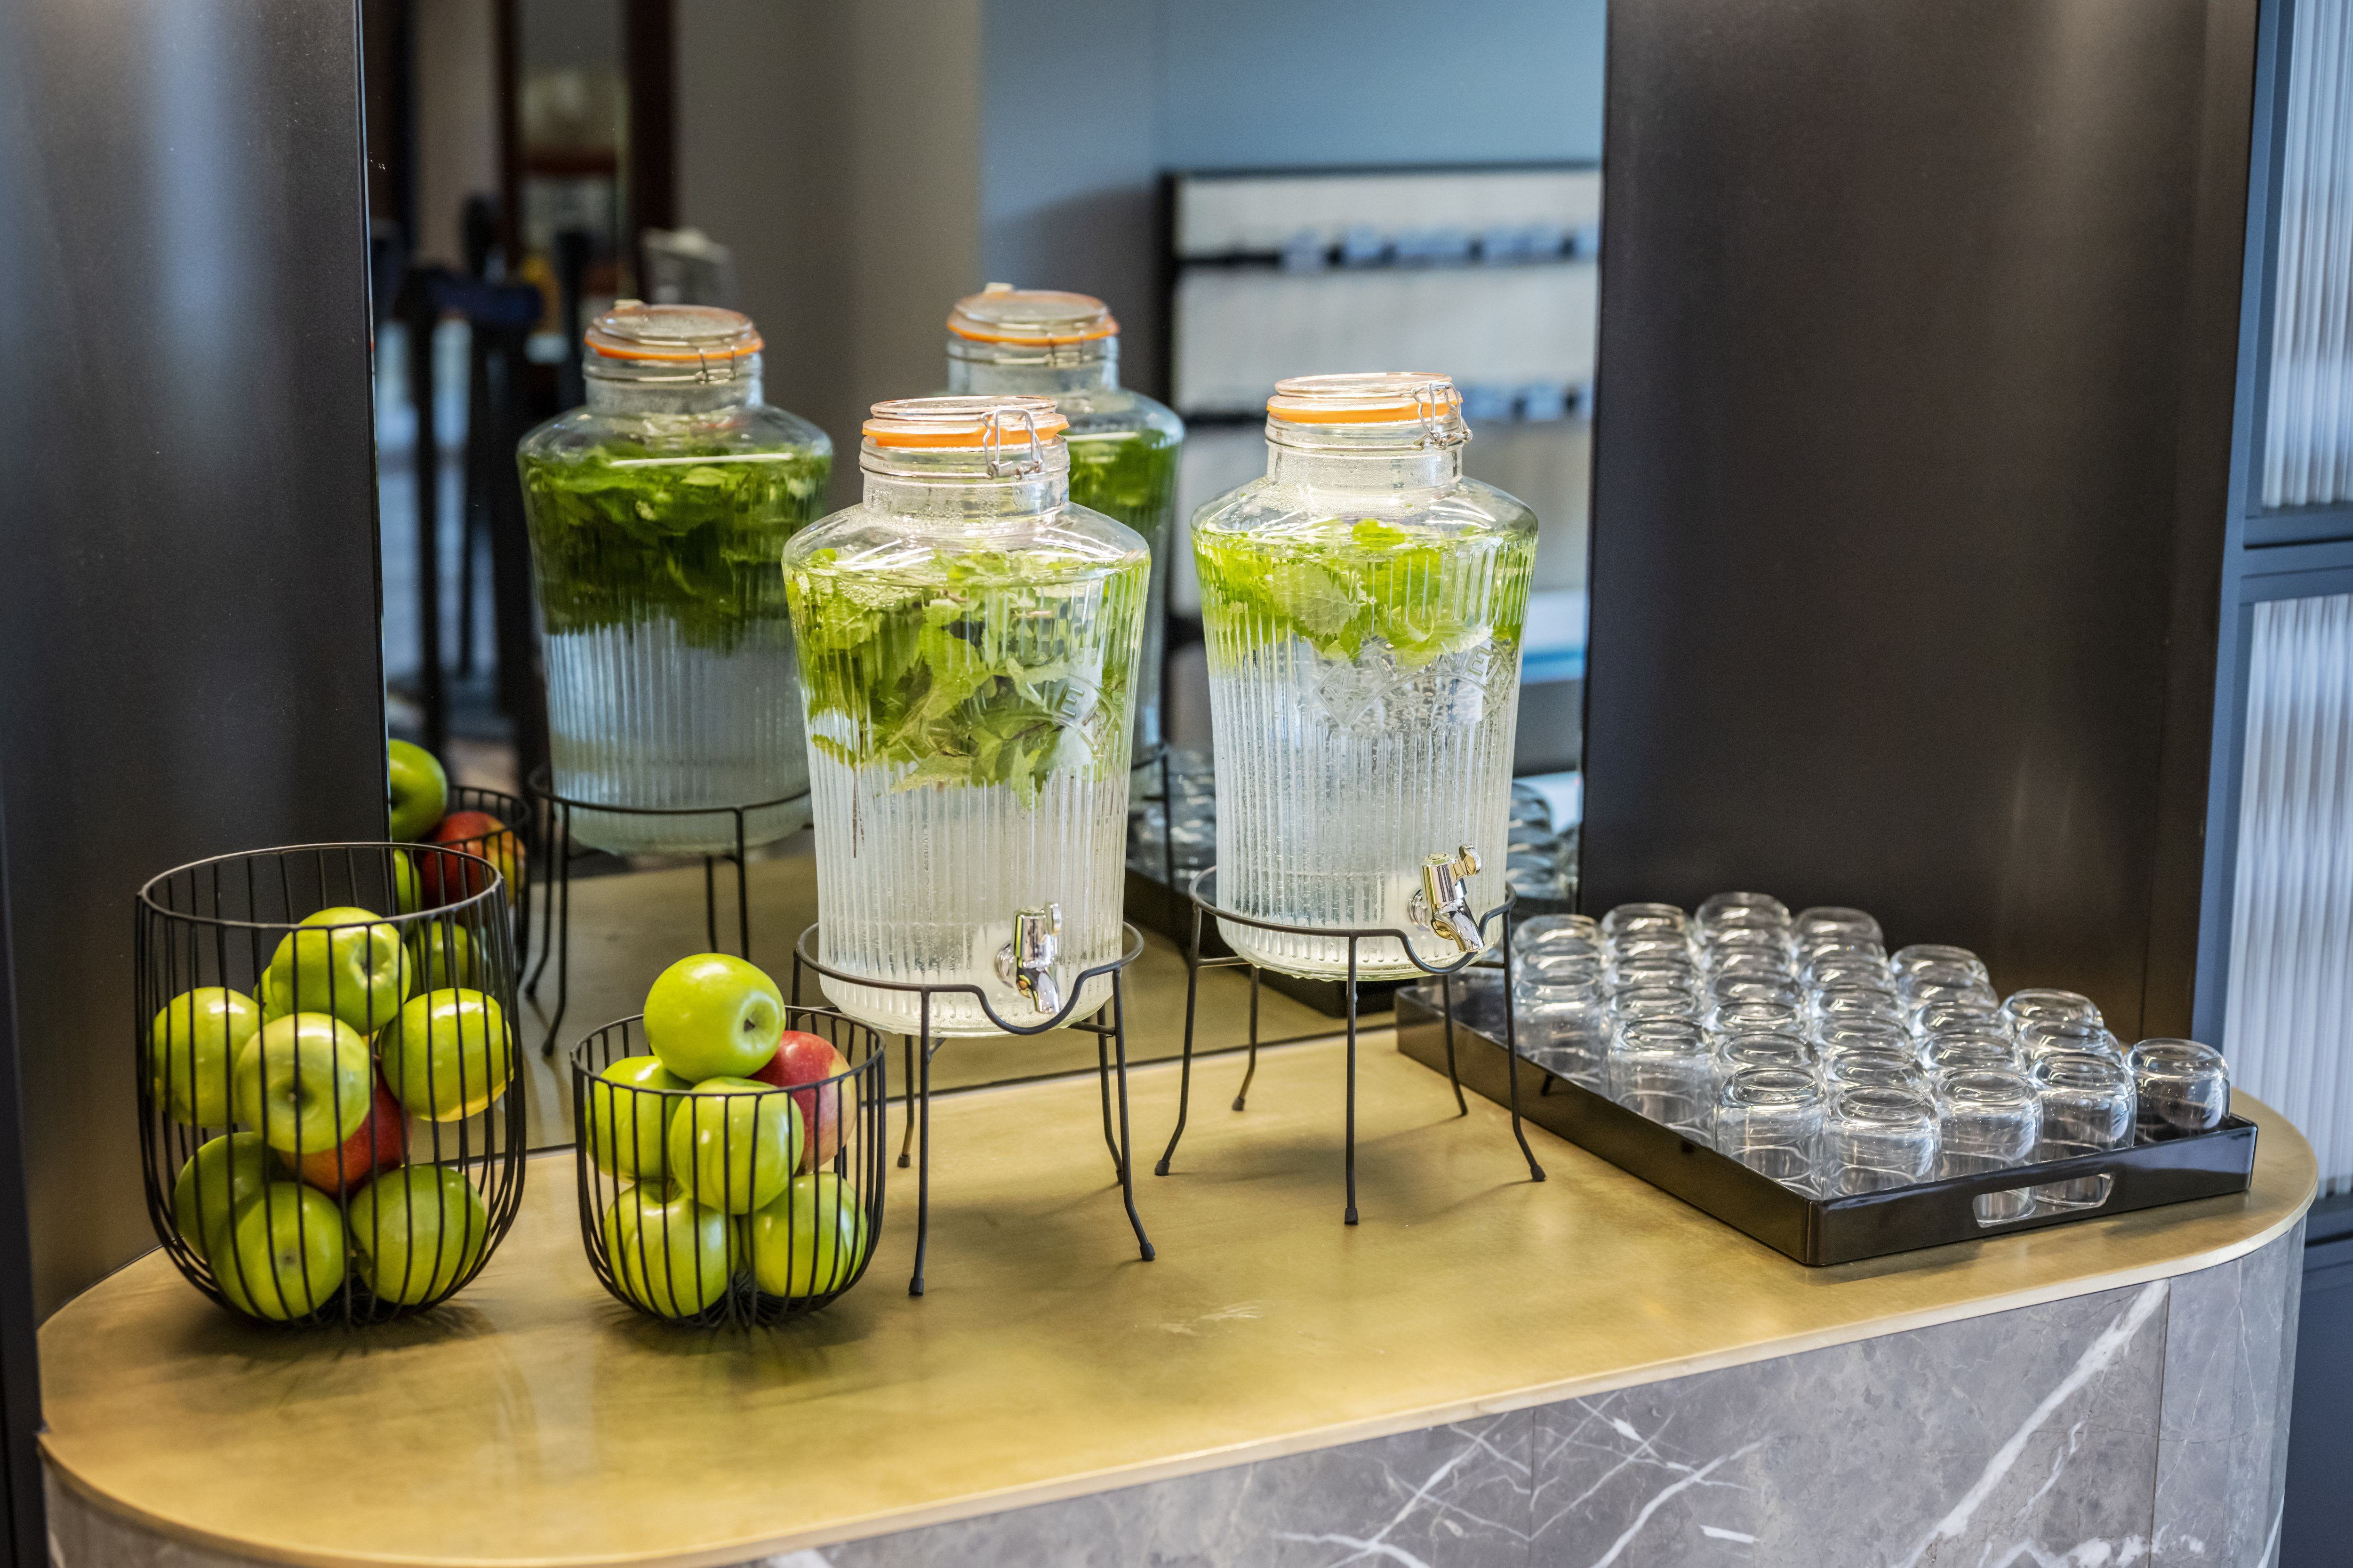 Lobby water station with fruit